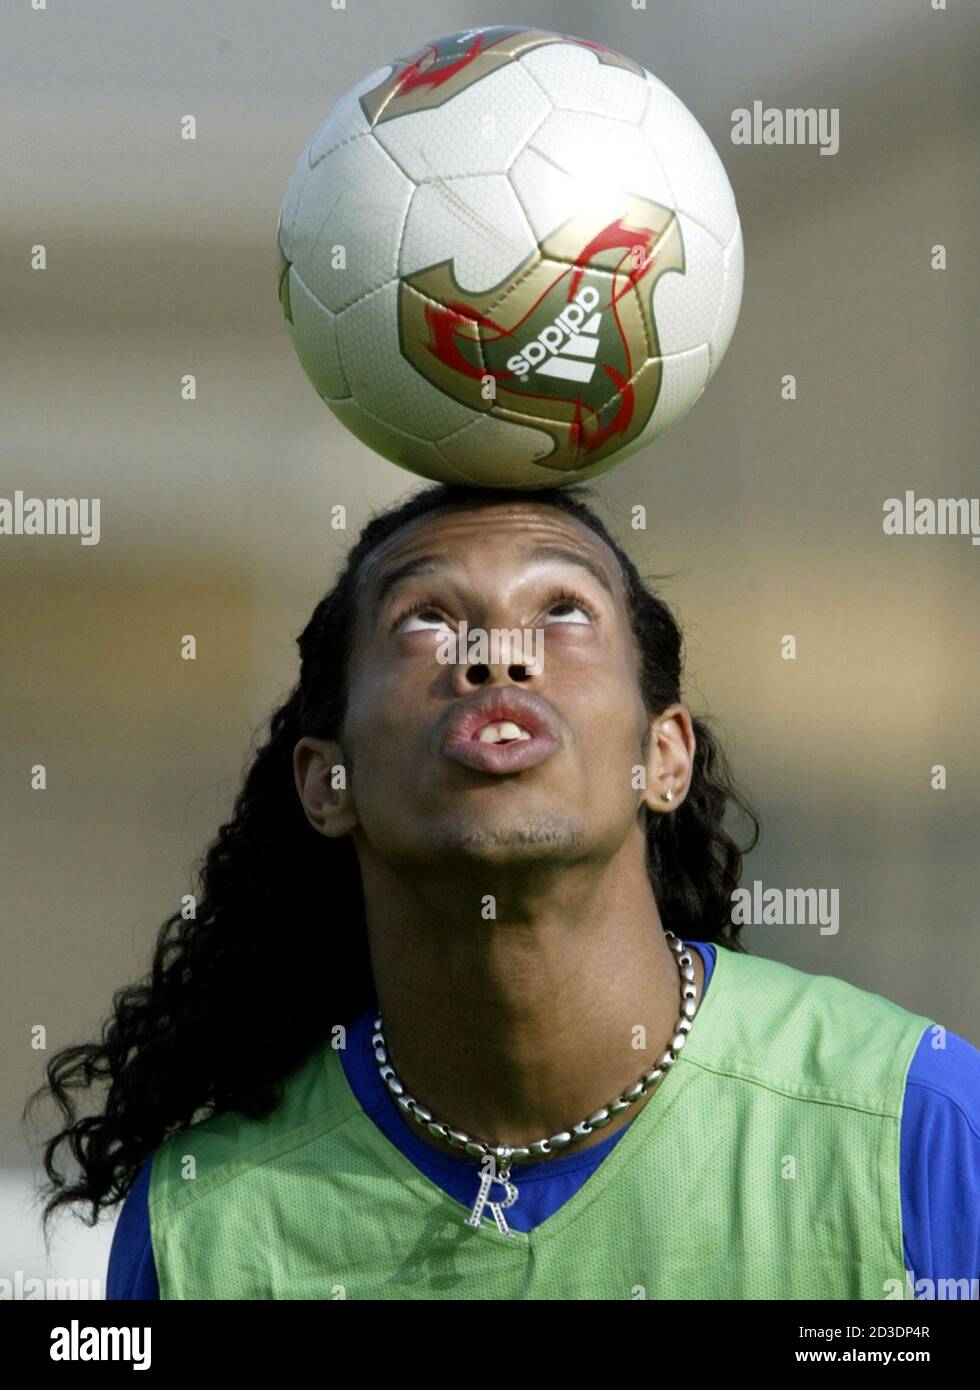 Brazilian striker Ronaldinho, of French team Paris Saint Germain,shows off his ball skill during a squad practice session at Cam de Loges in Saint Germain En-Lay, 40km from Paris, June 14, 2003. Brazil will face Cameroon on June 19 in the Confederations Cup. REUTERS/Paulo Whitaker  PW/AA Stock Photo